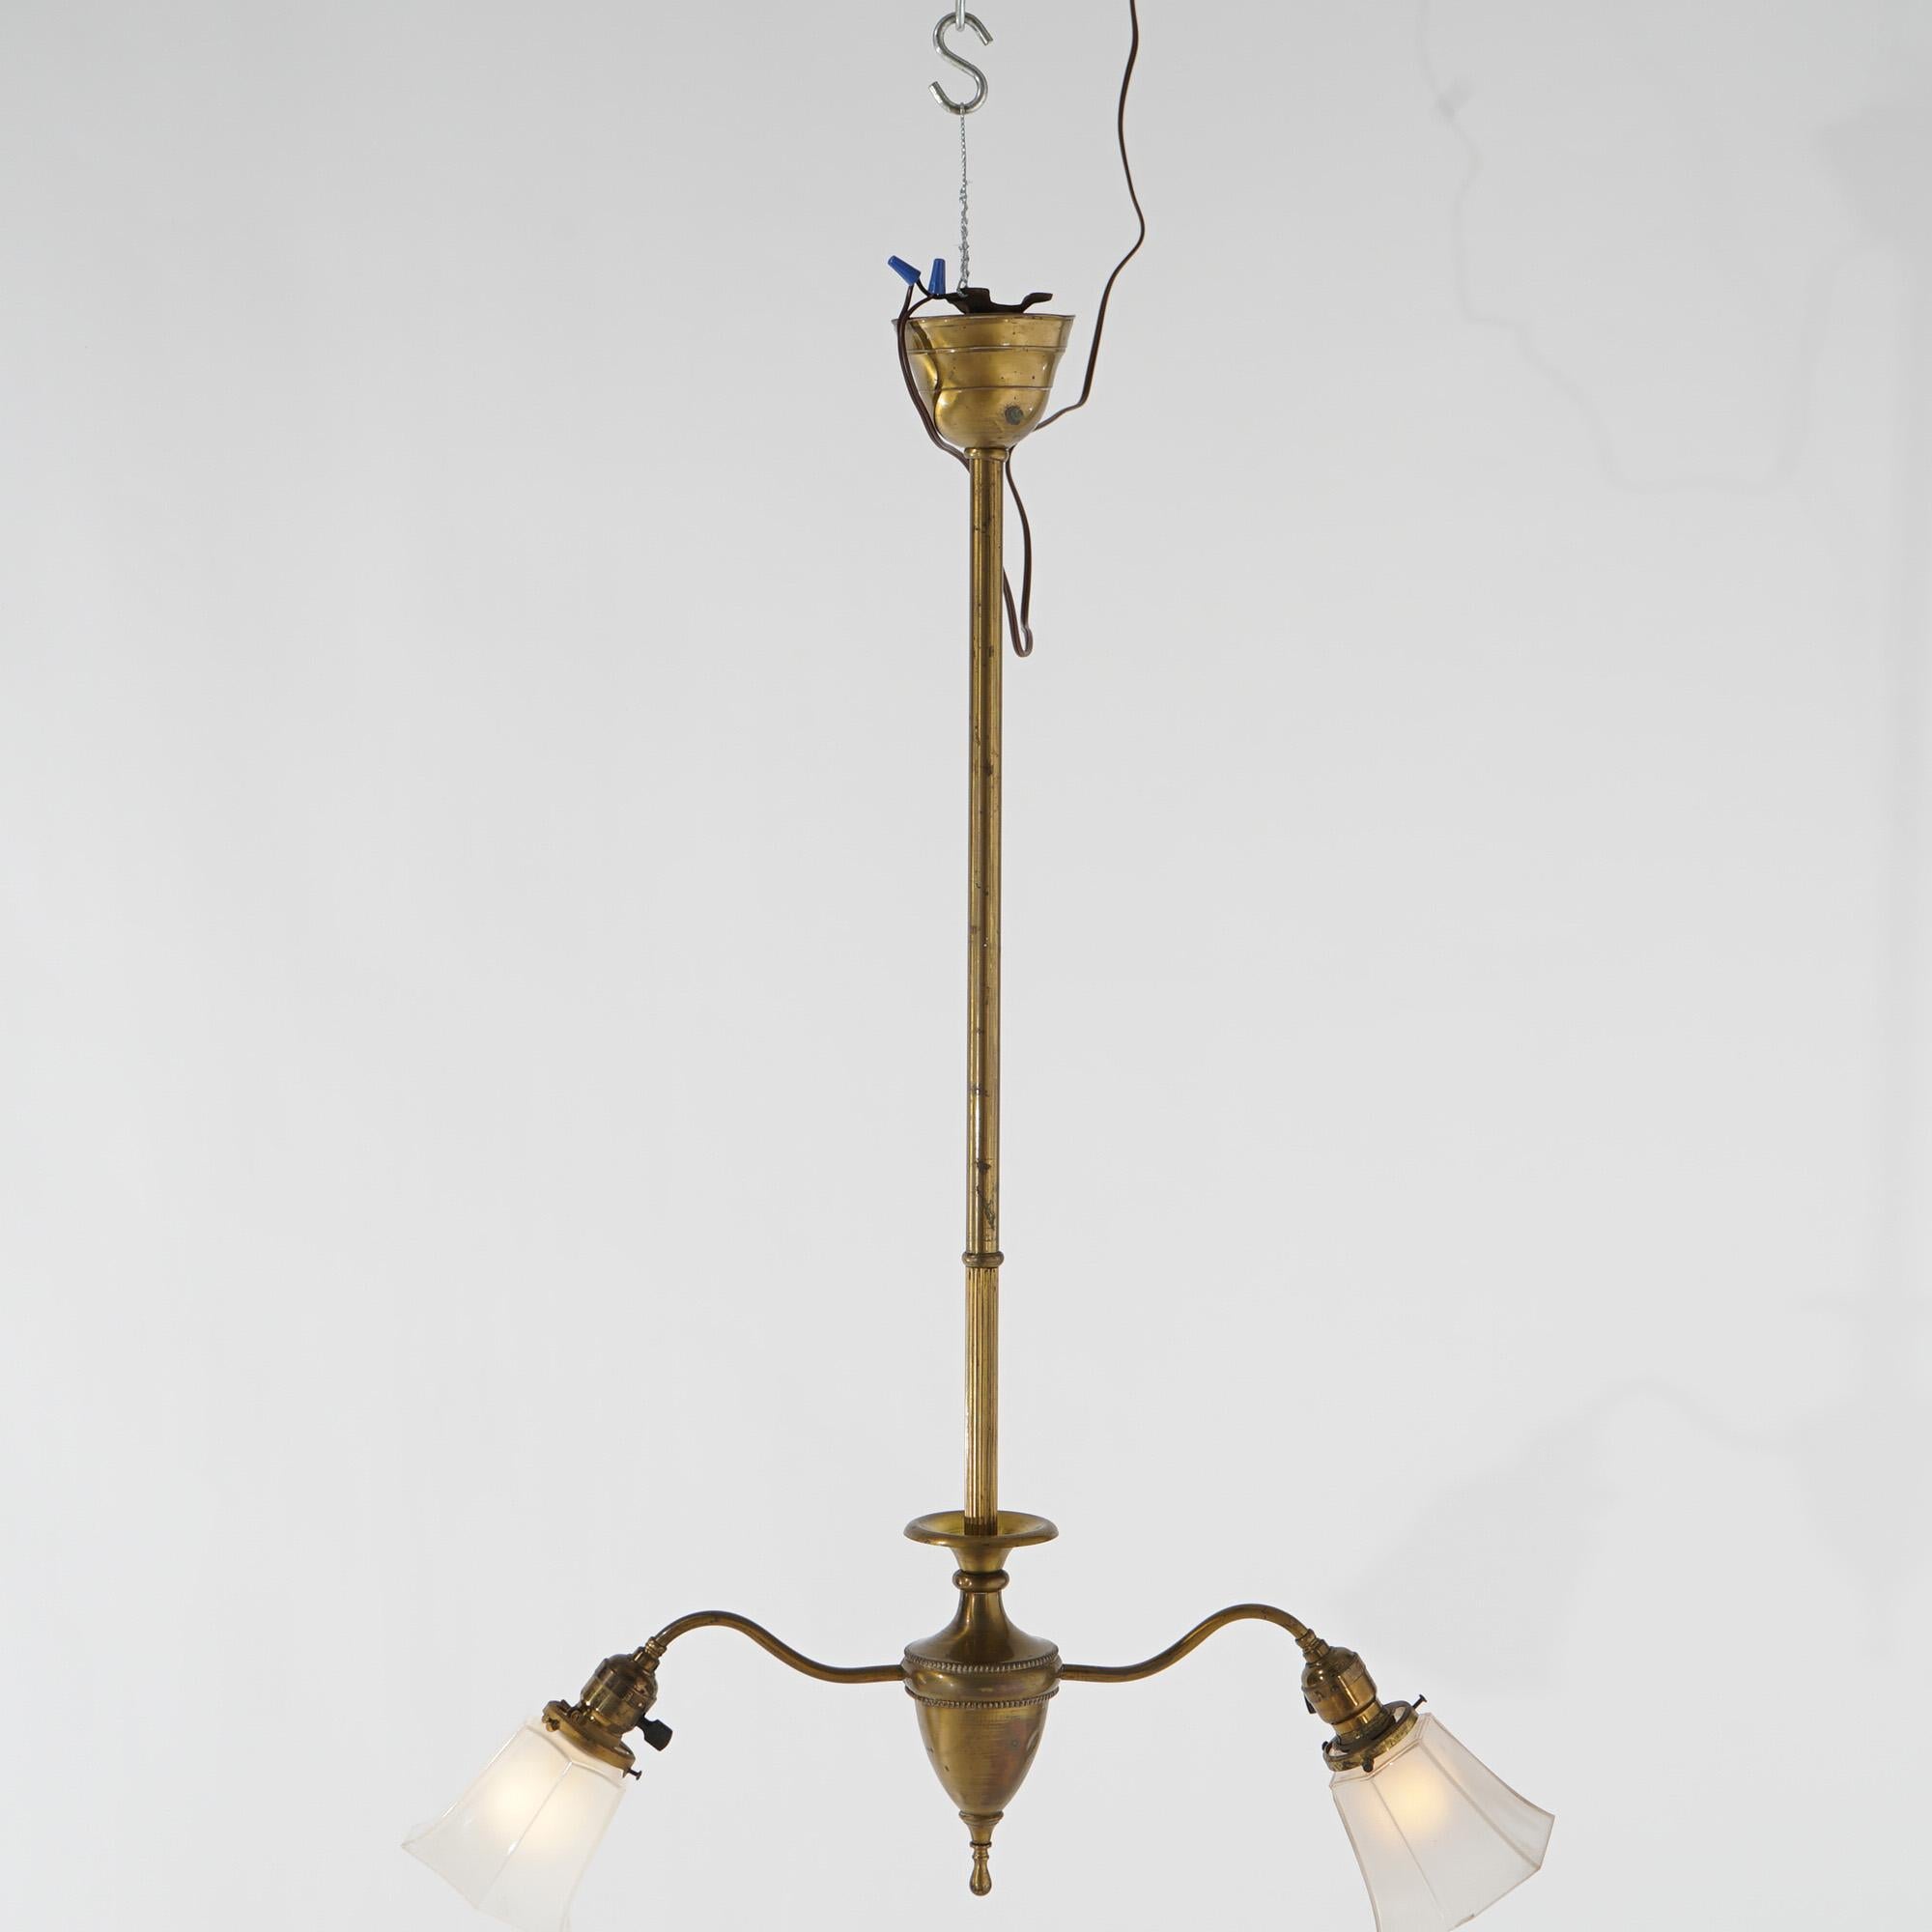 20th Century Antique Brass & Gilt Metal Two-Light Ceiling Fixture Circa 1920 For Sale